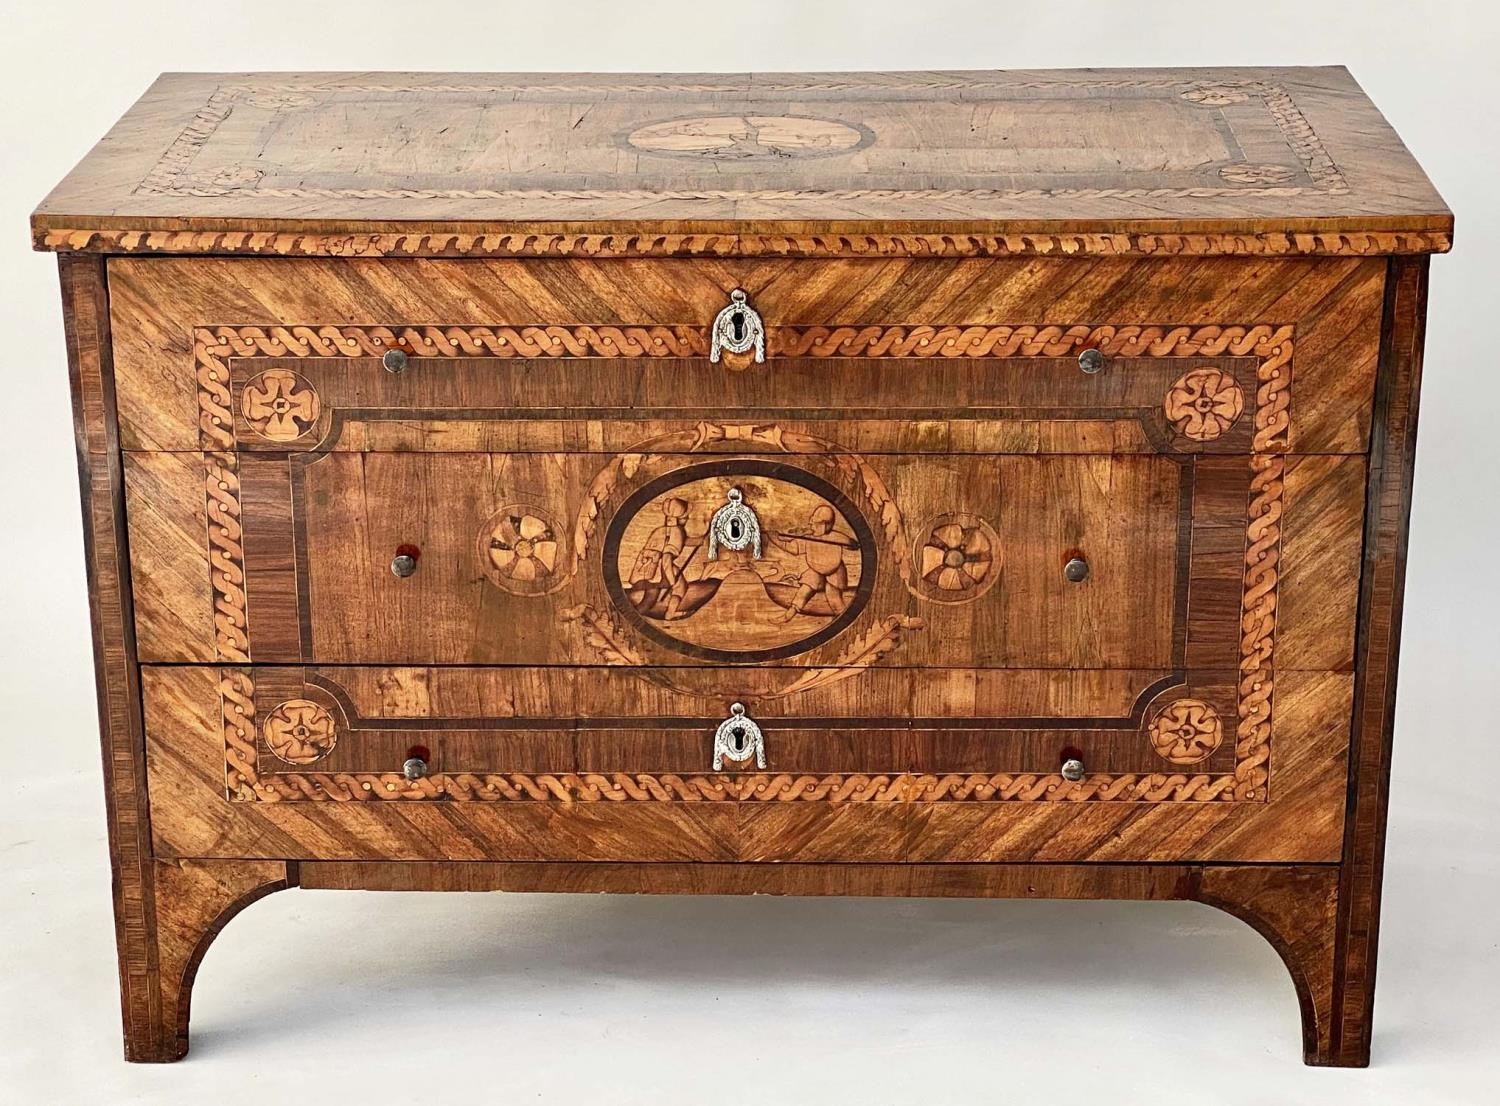 NORTH ITALIAN COMMODE, 18th century Lombardy walnut and marquetry commode with three drawers,